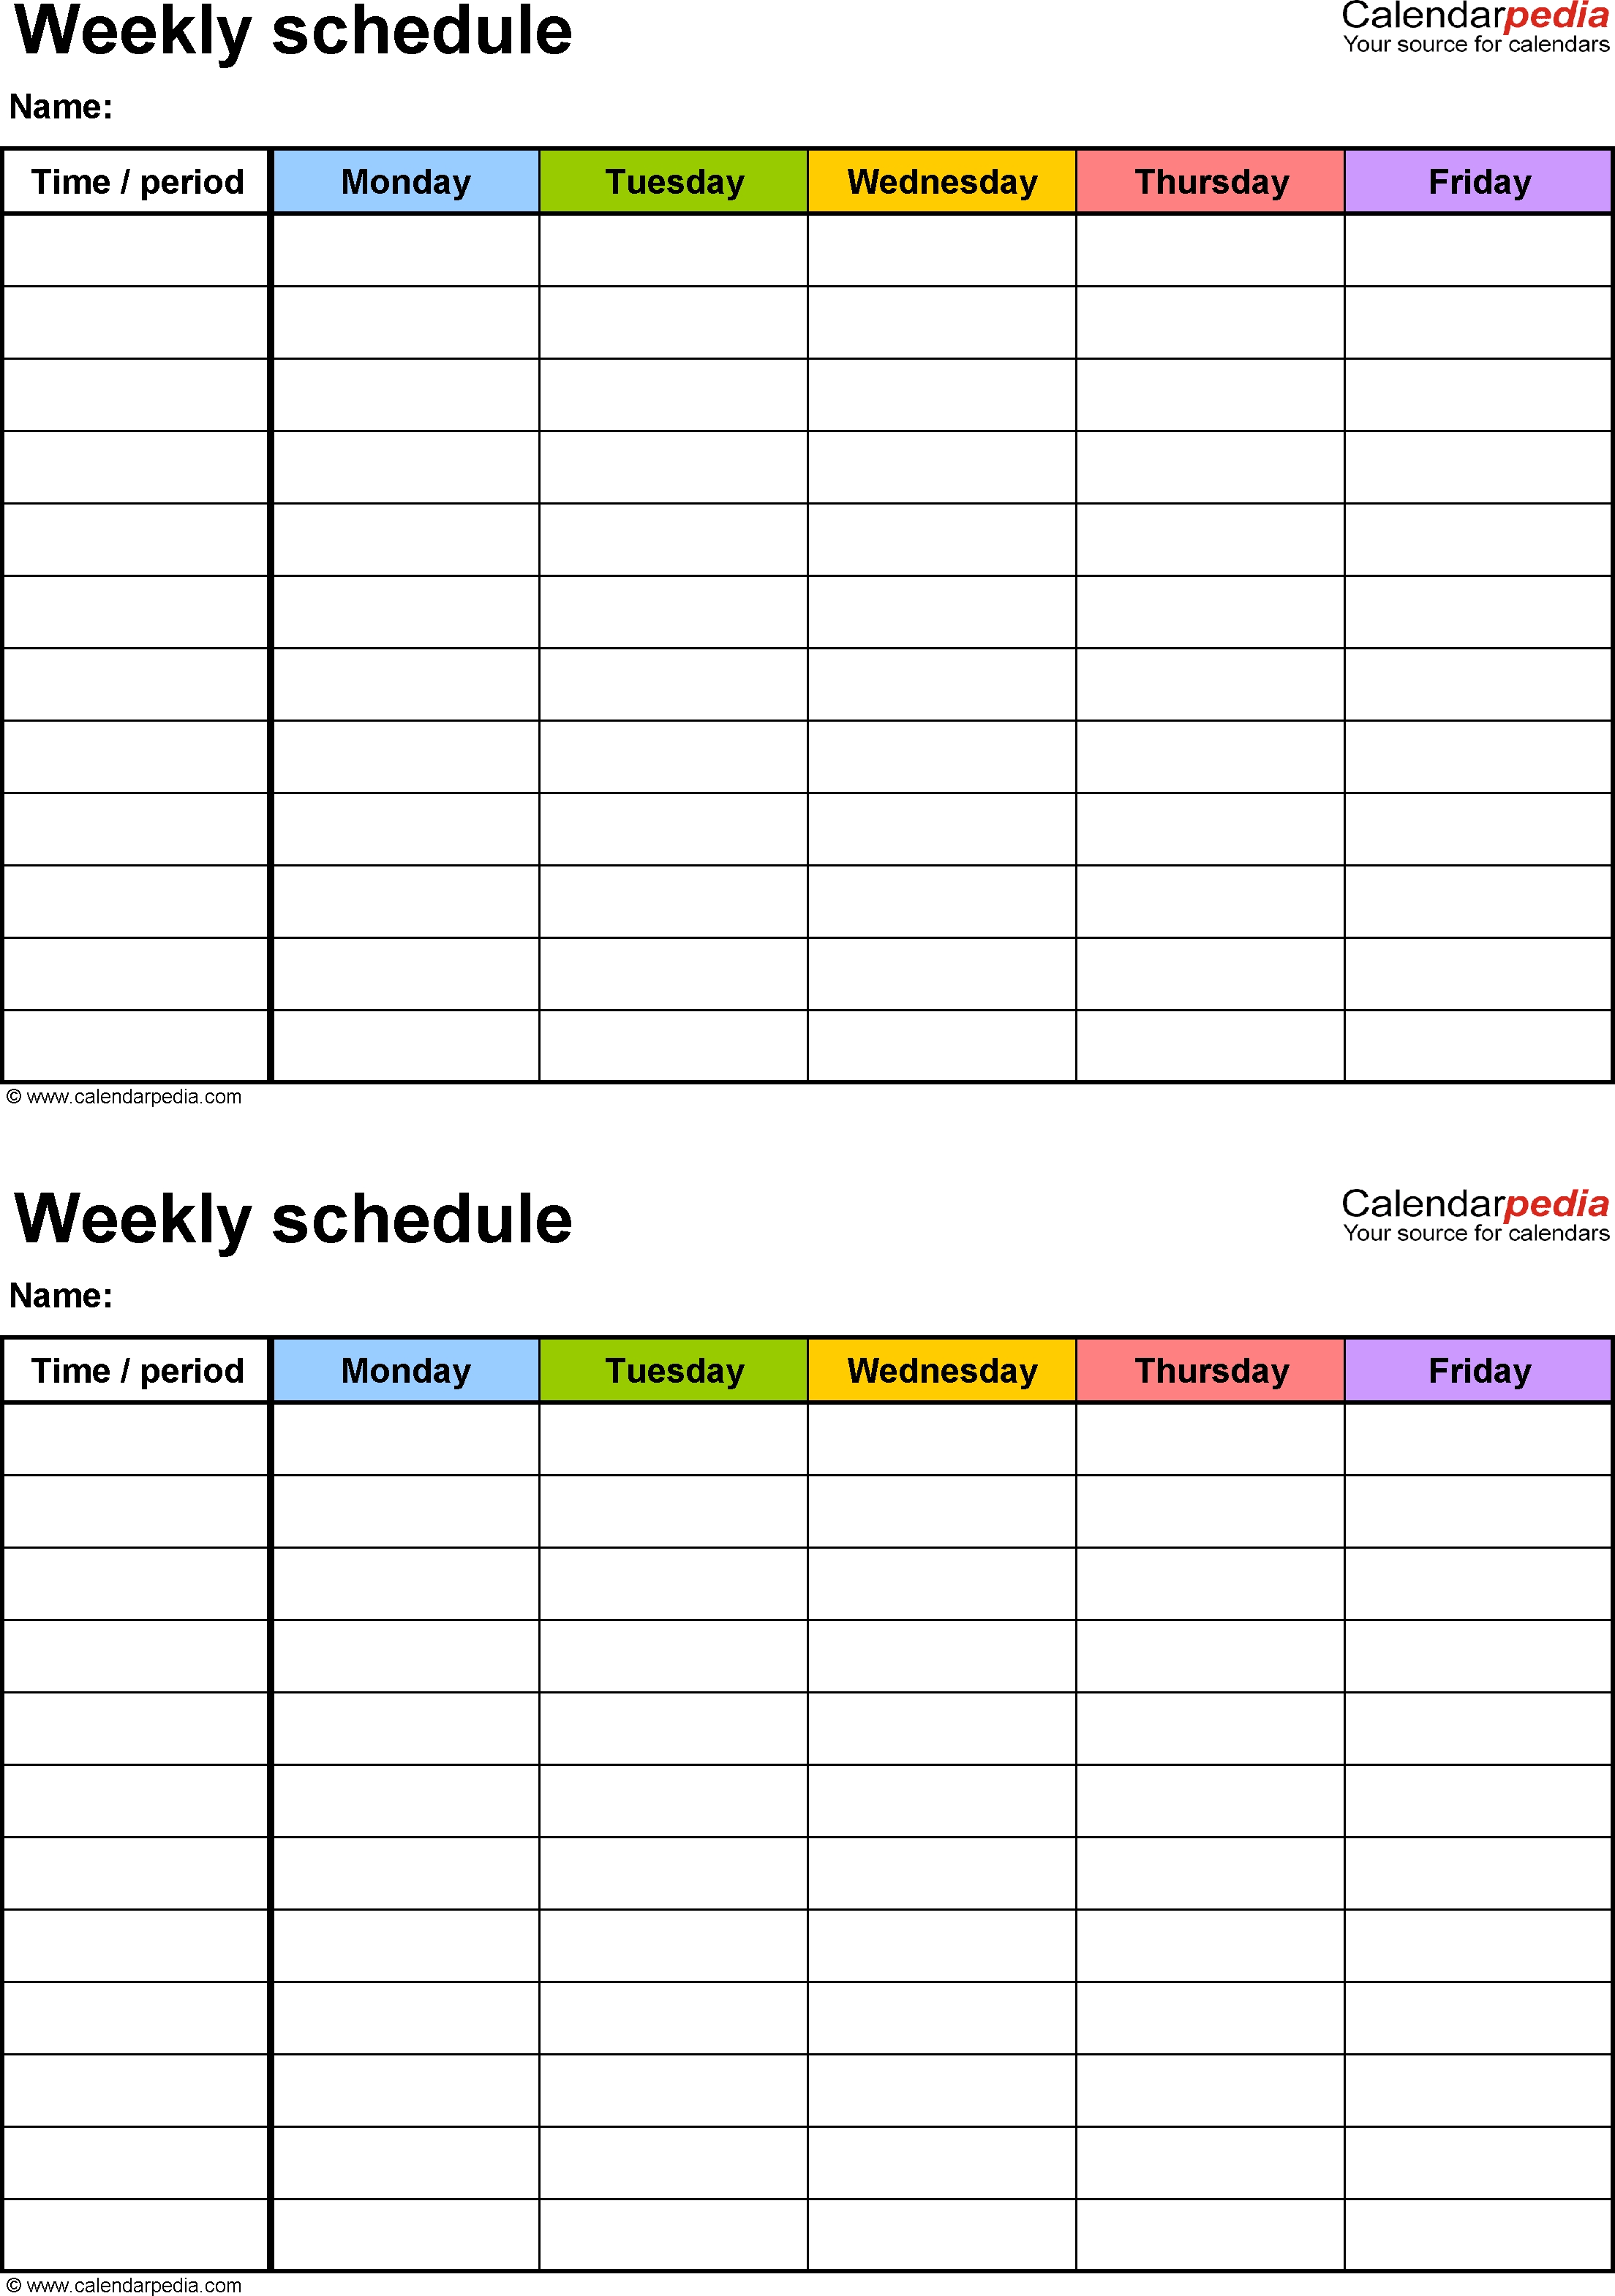 Free Weekly Schedule Templates For Excel - 18 Templates-Build A Saturday To Friday Monthly Calendar